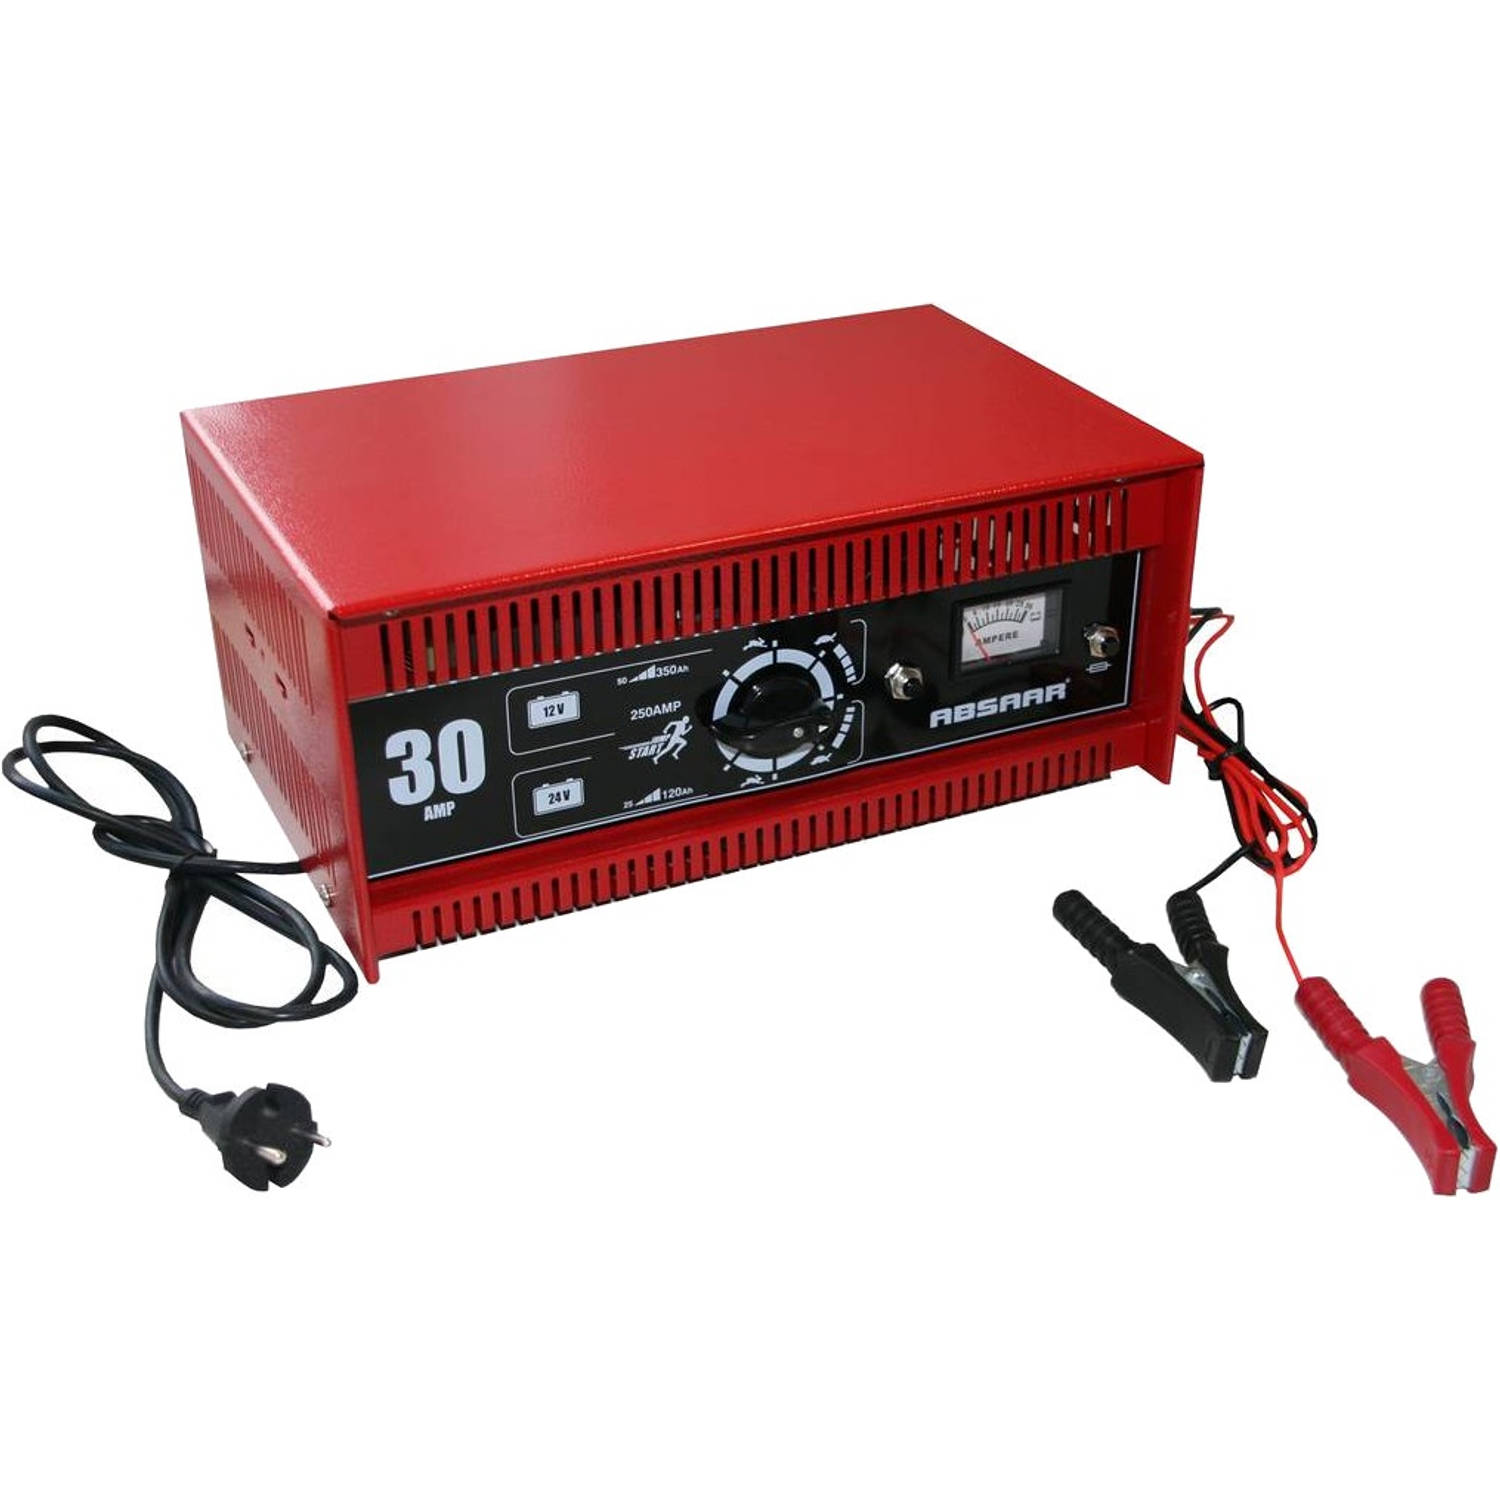 Absaar professionele acculader 12/24 Volt 25-350 Ah 40A rood